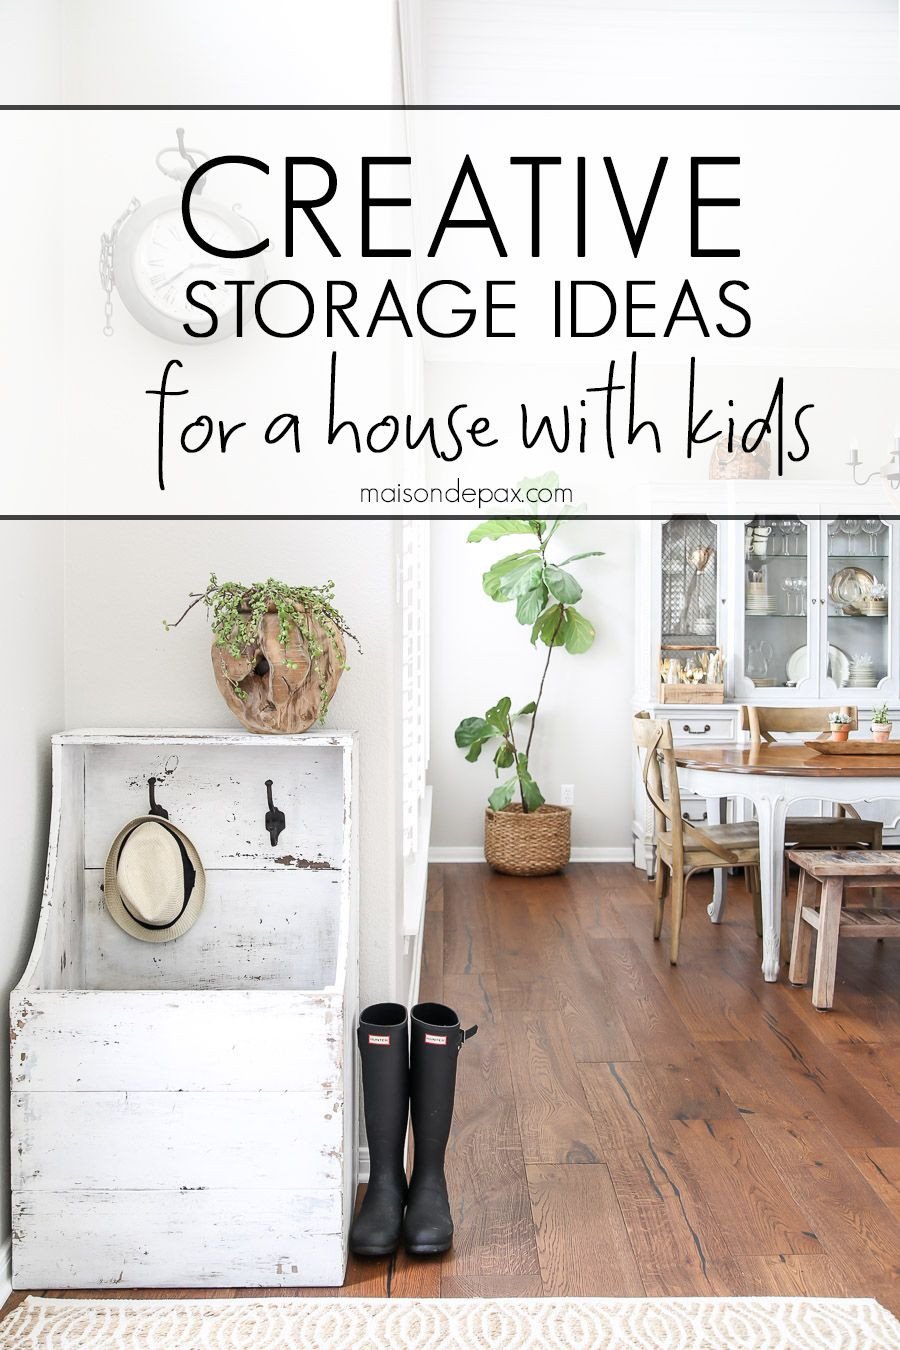 Kids Bedroom Storage Ideas New 10 Kids Storage Ideas organizing Tips for A House with Kids